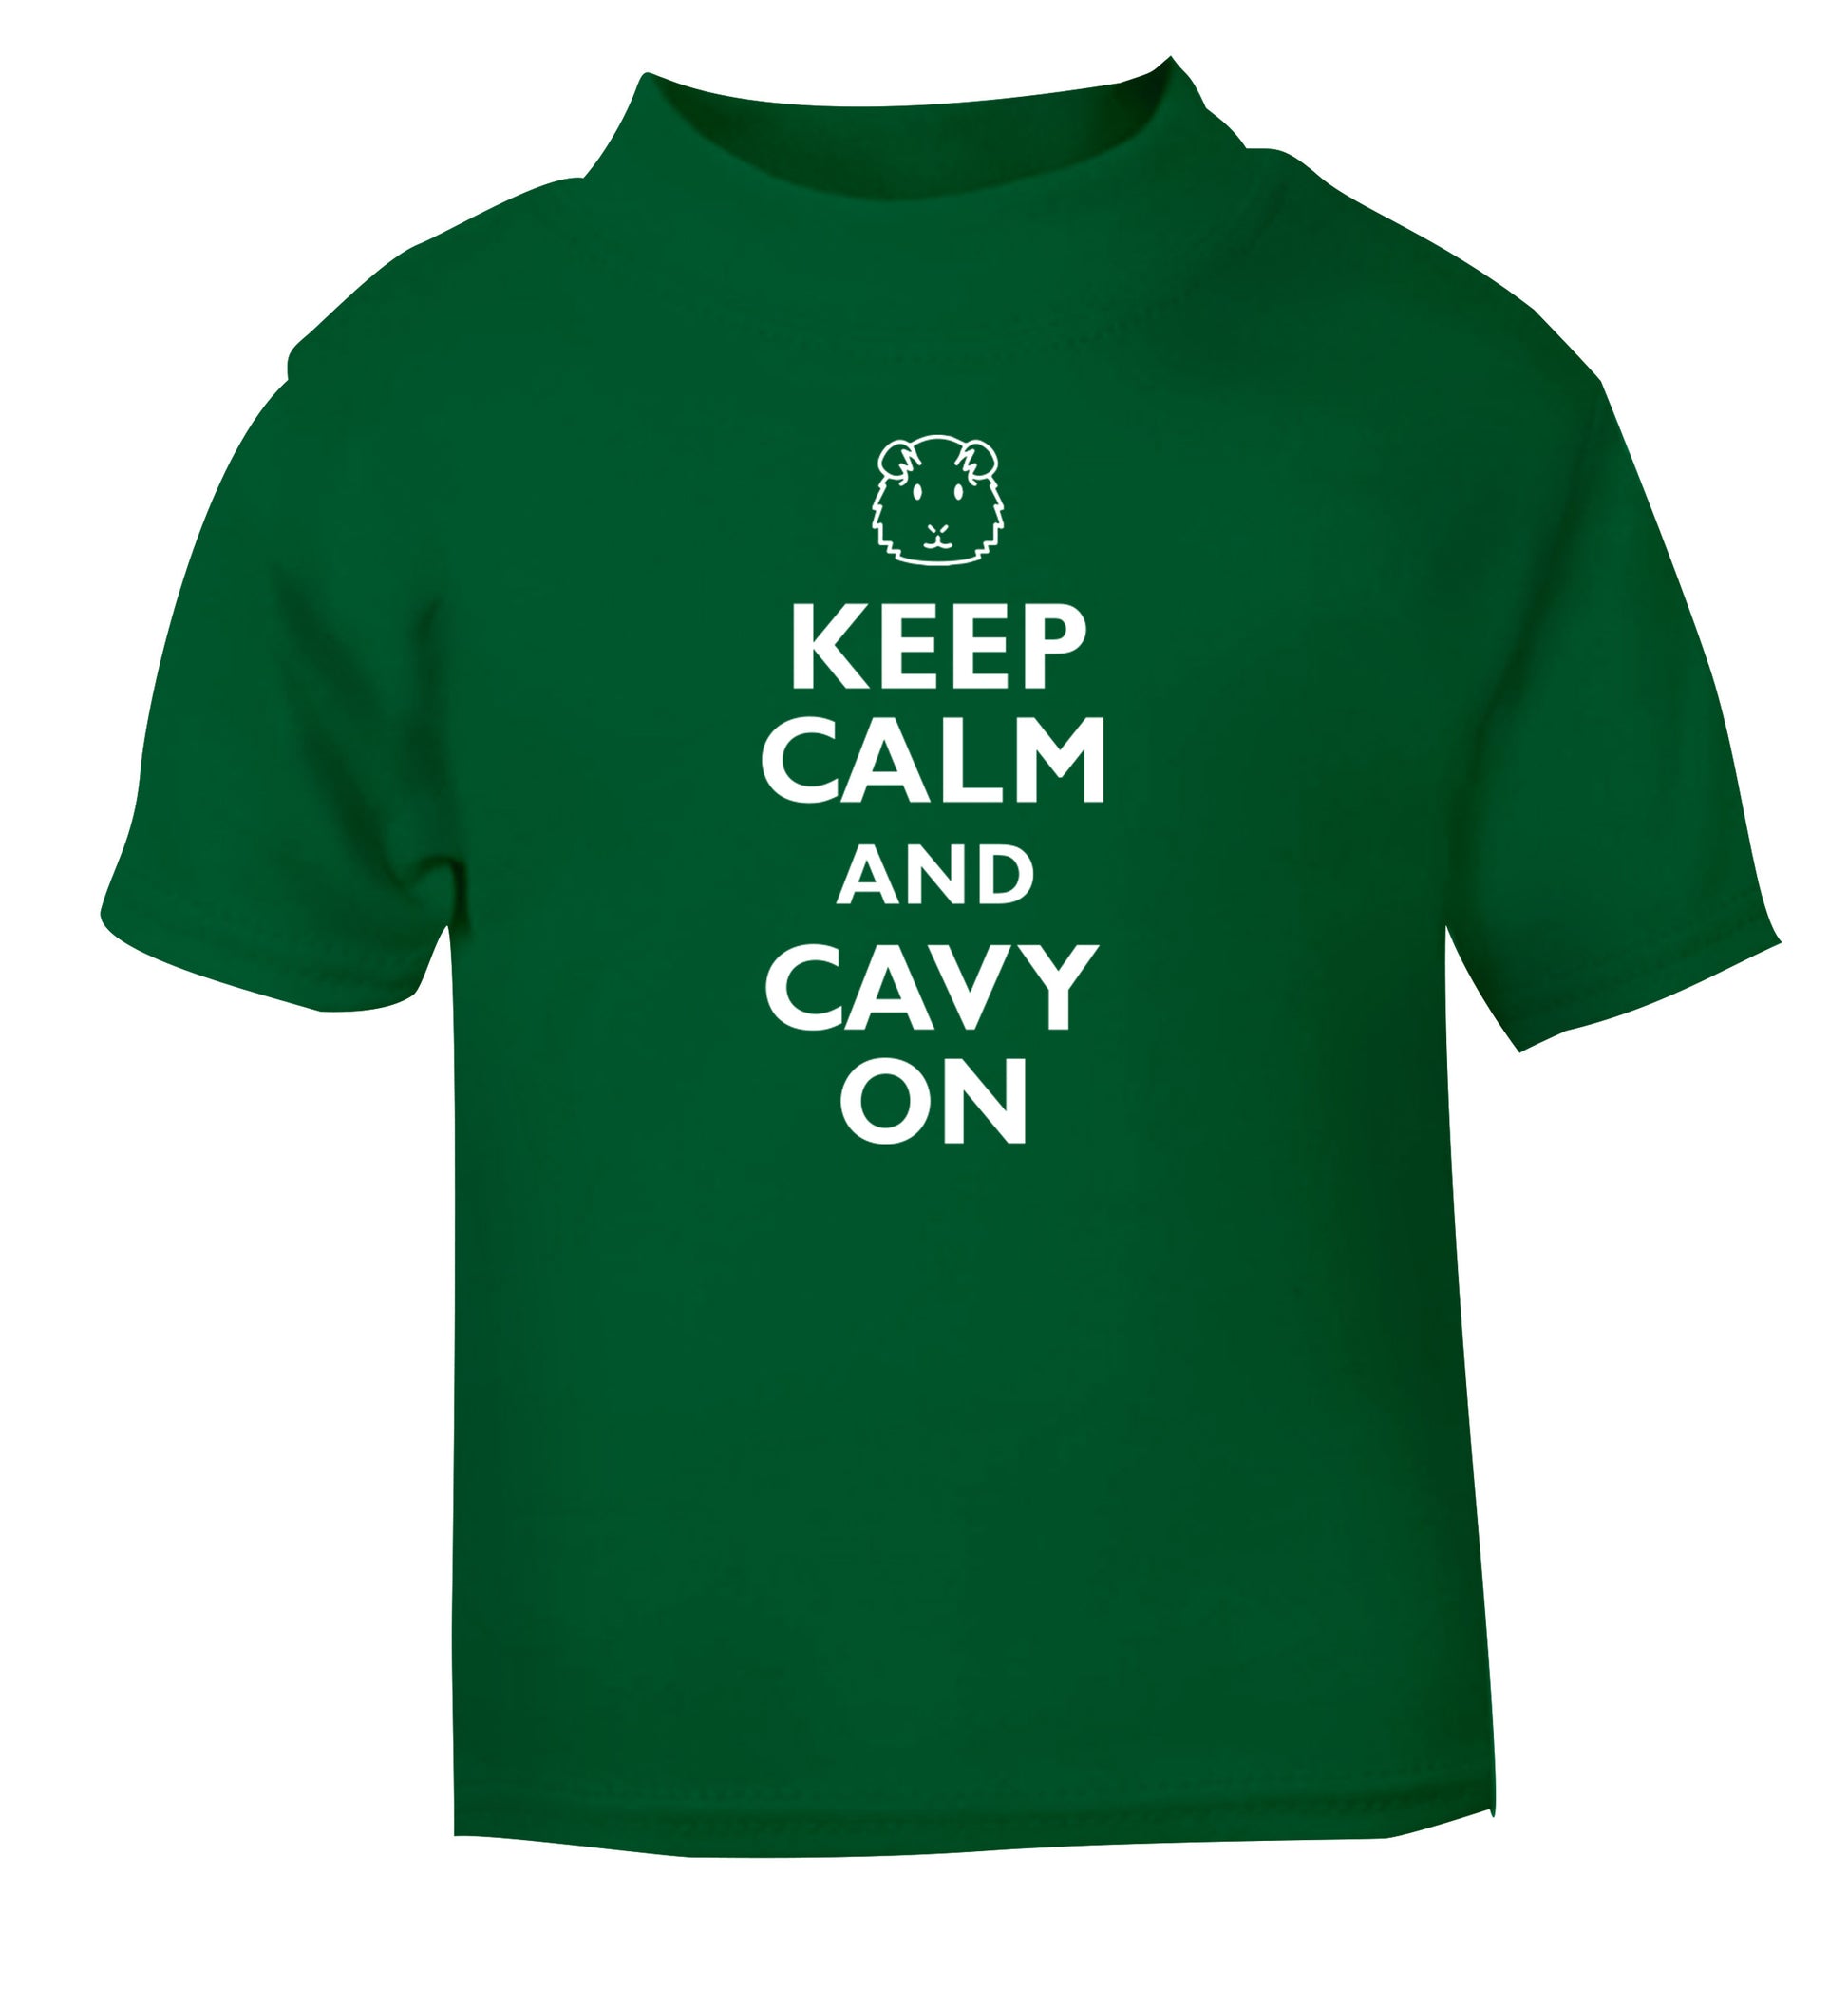 Keep calm and cavvy on green Baby Toddler Tshirt 2 Years